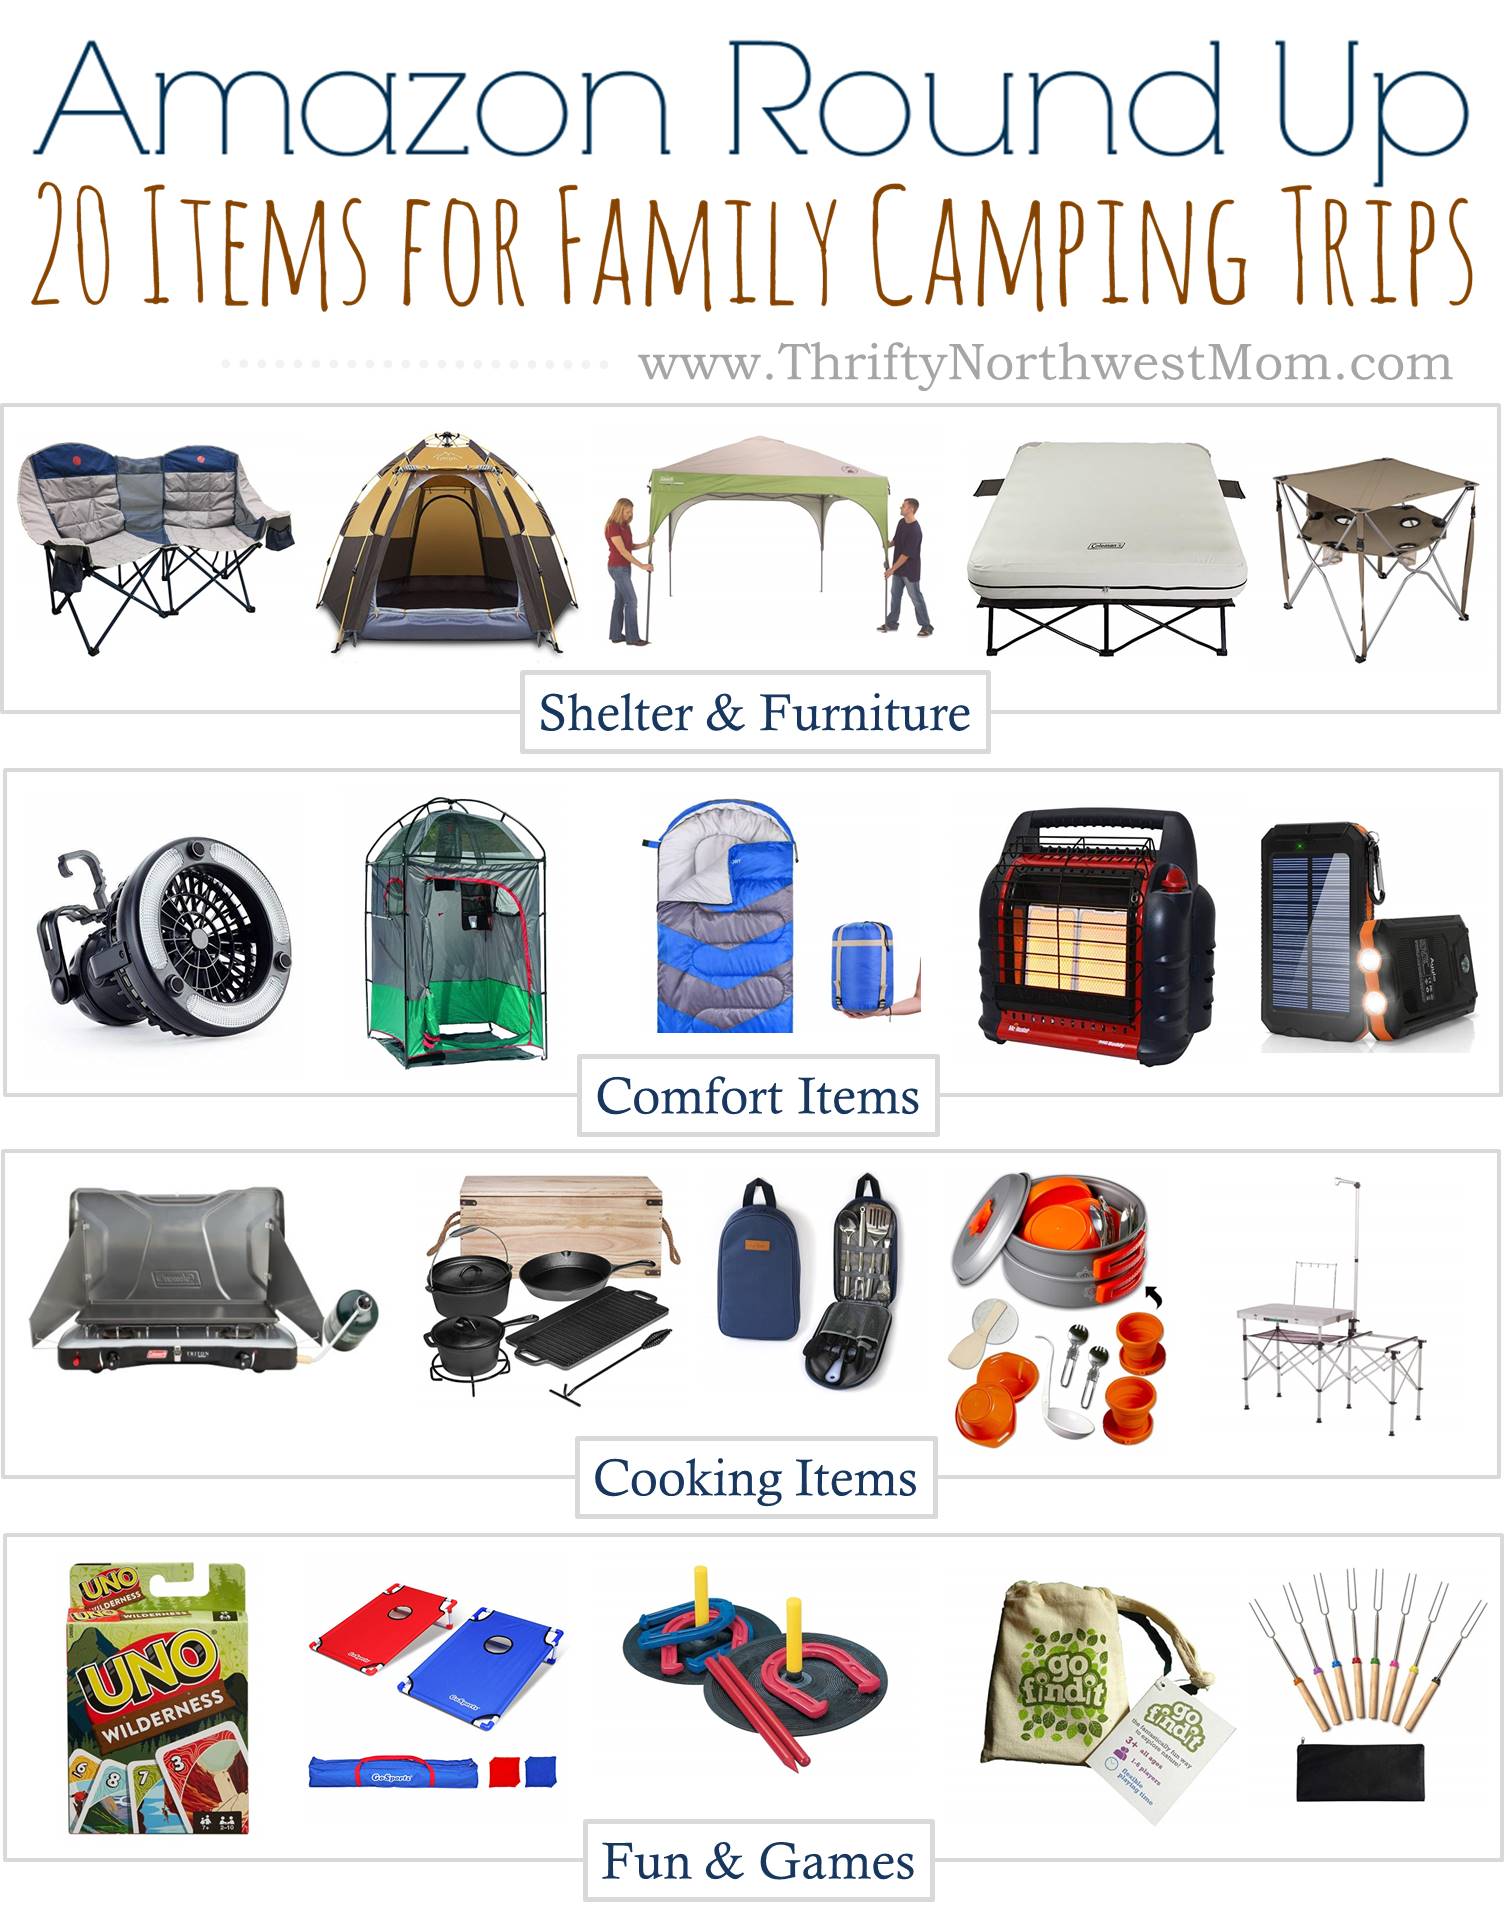 Camping Gear List For Beginners & Families - Makes Set Up for